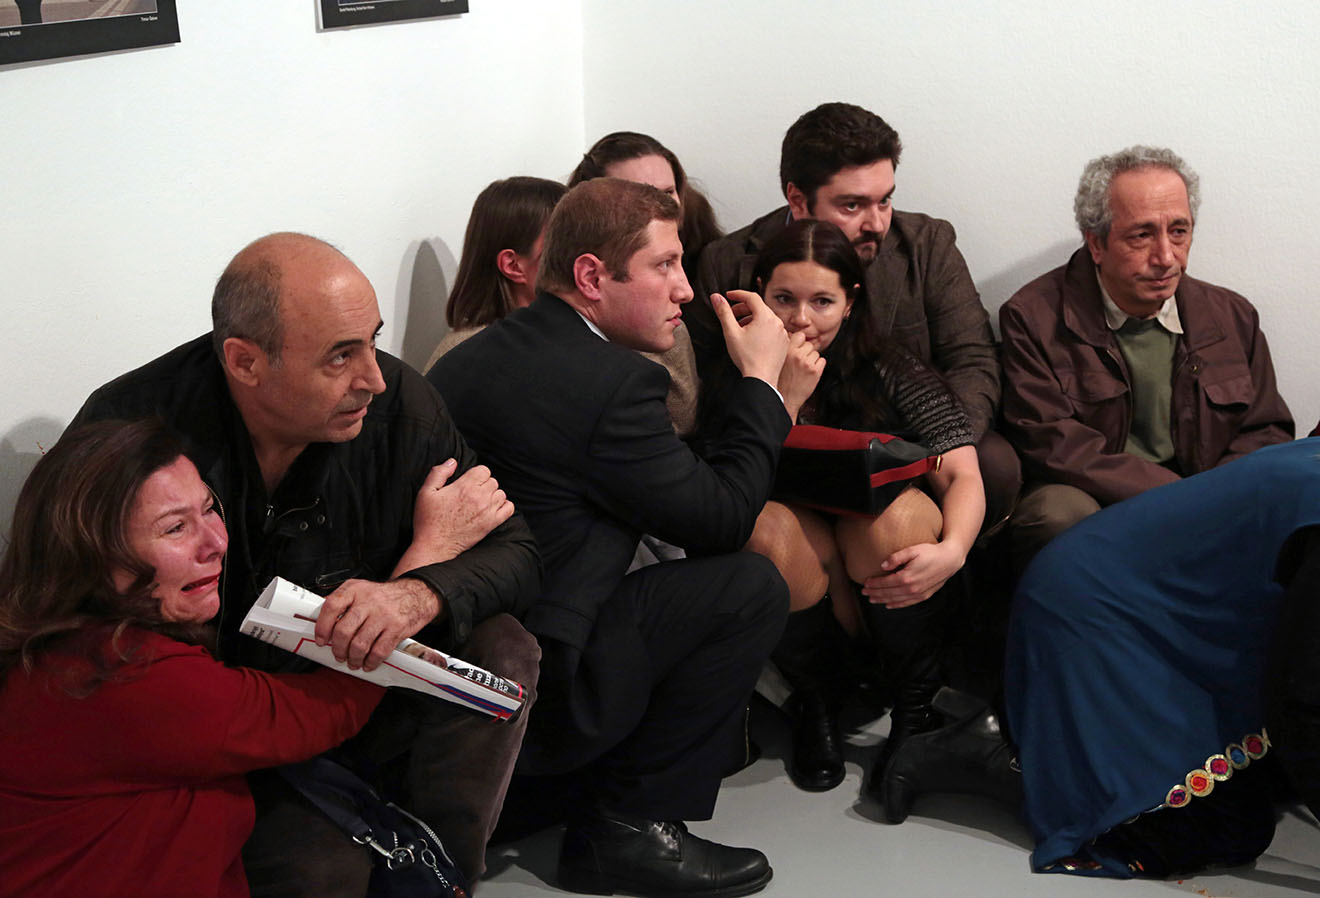 Gallery goers cower after Mevlut Mert Altintas shot Andrei Karlov, the Russian ambassador to Turkey, at an art gallery in Ankara, Turkey, Monday, Dec. 19, 2016. At first, AP photographer Burhan Ozbilici thought it was a theatrical stunt when a man in a dark suit and tie pulled out a gun during the photography exhibition. The man then opened fire, killing Karlov. (AP Photo/Burhan Ozbilici)